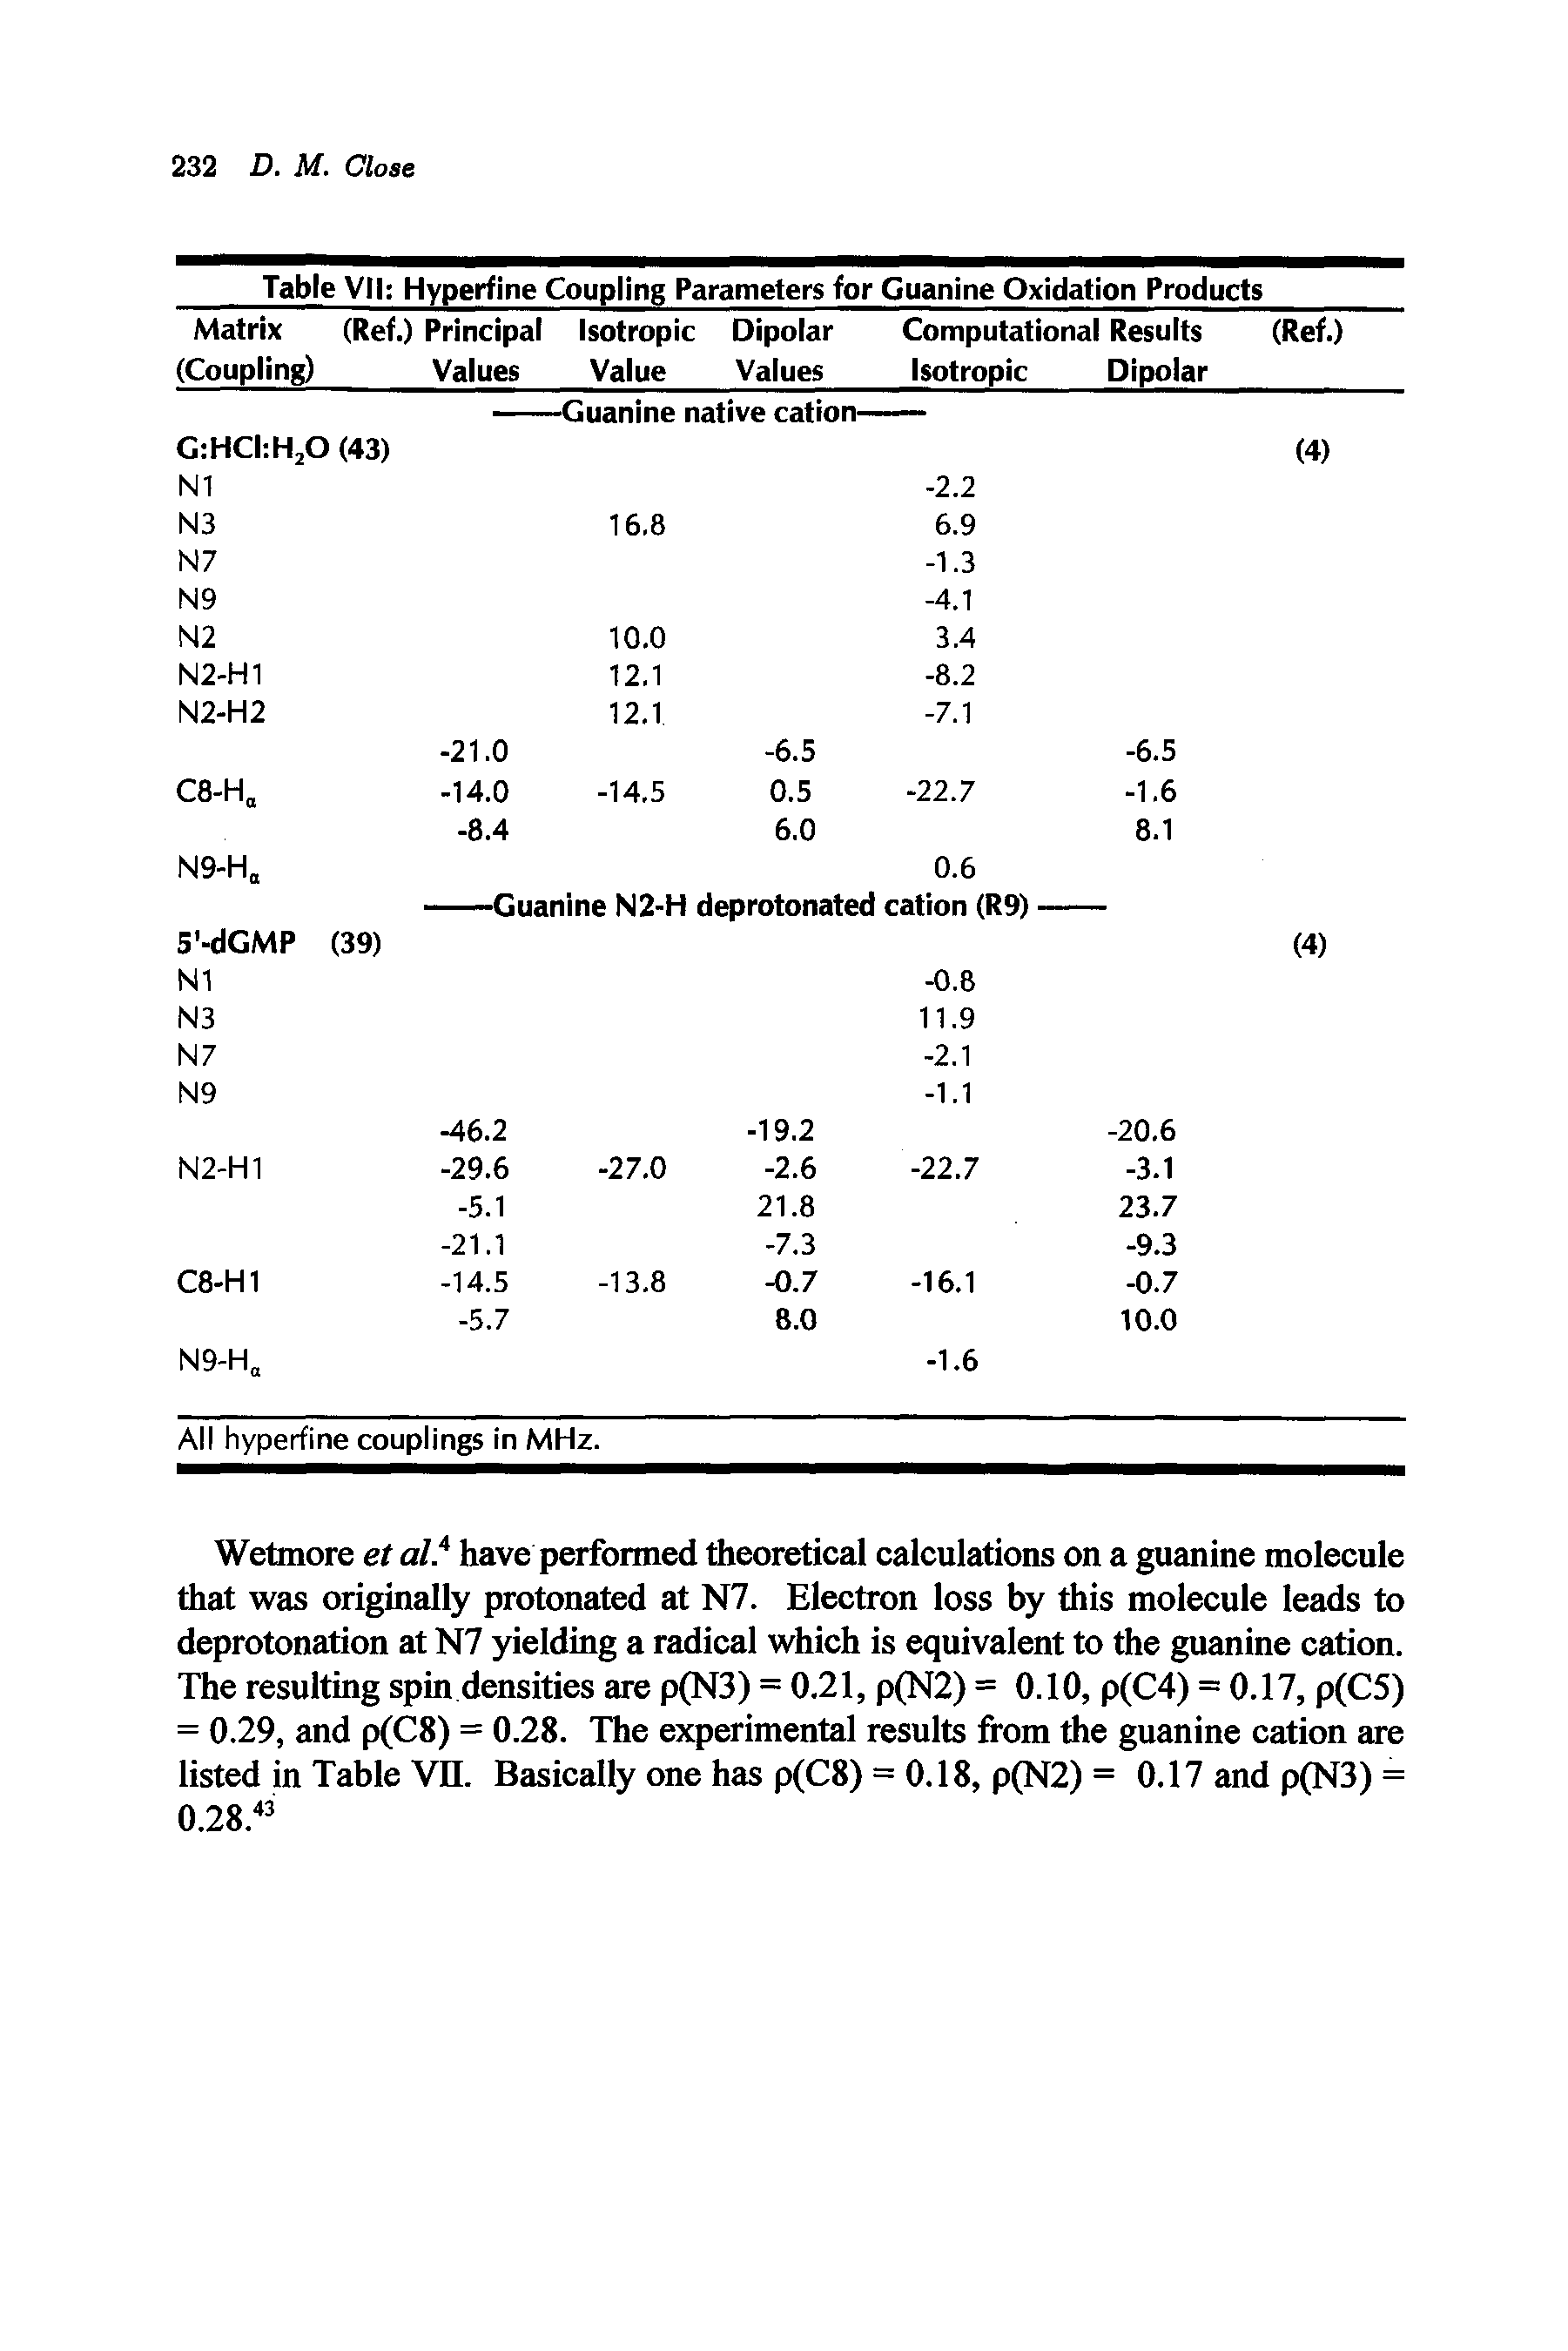 Table VII Hyperfine Coupling Parameters for Guanine Oxidation Products ...